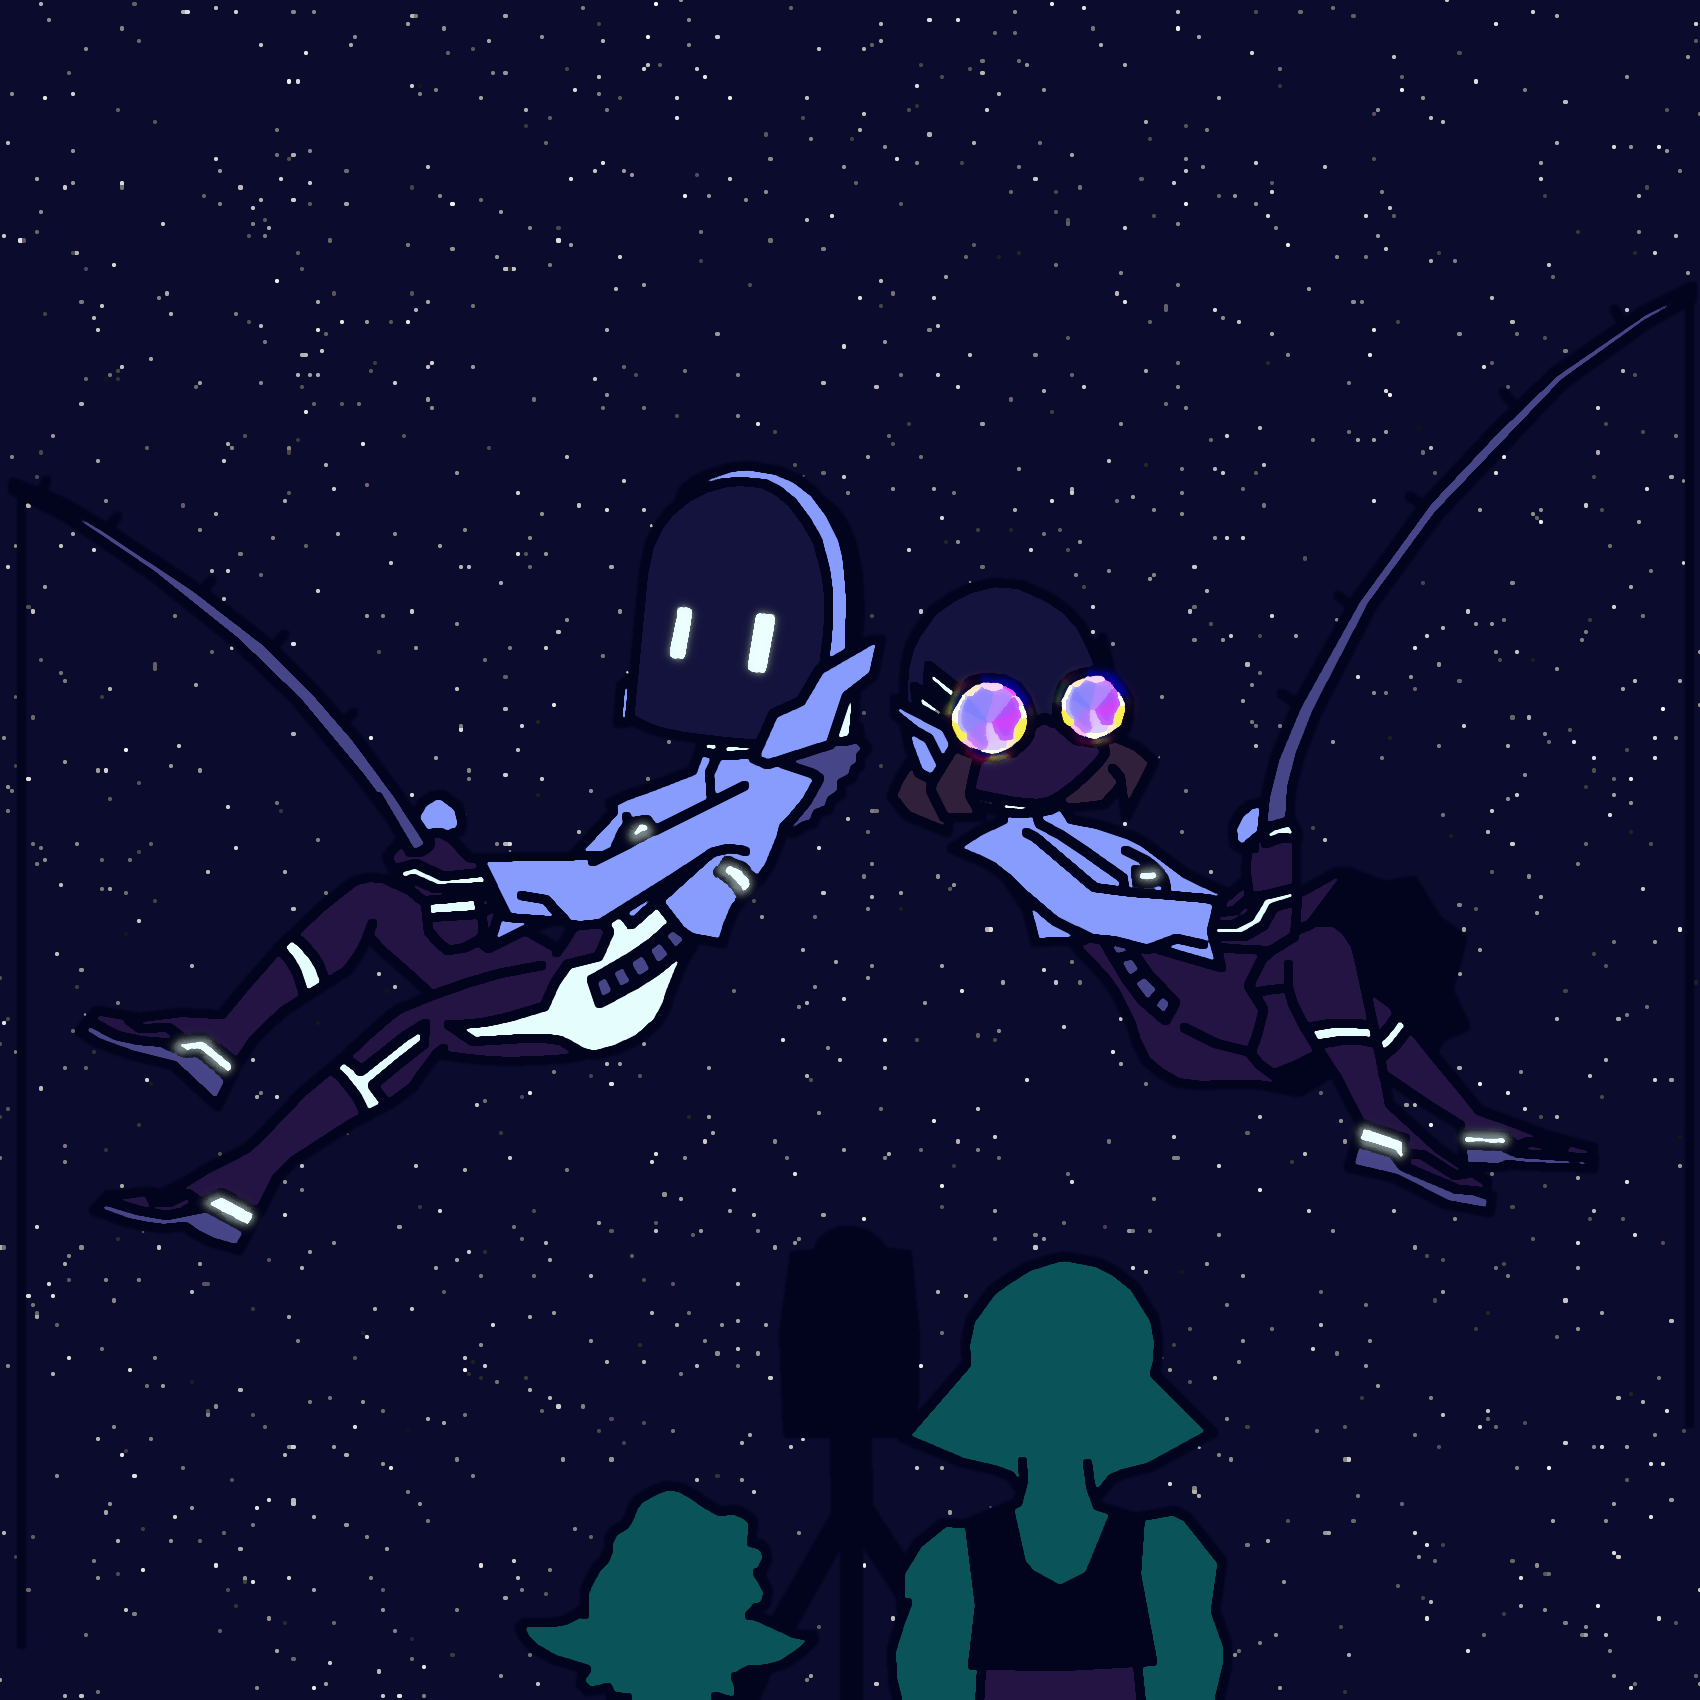 Sonny and Rezo float in space, holding fishing rods as Zyzygy and Ezicon film for a music video.